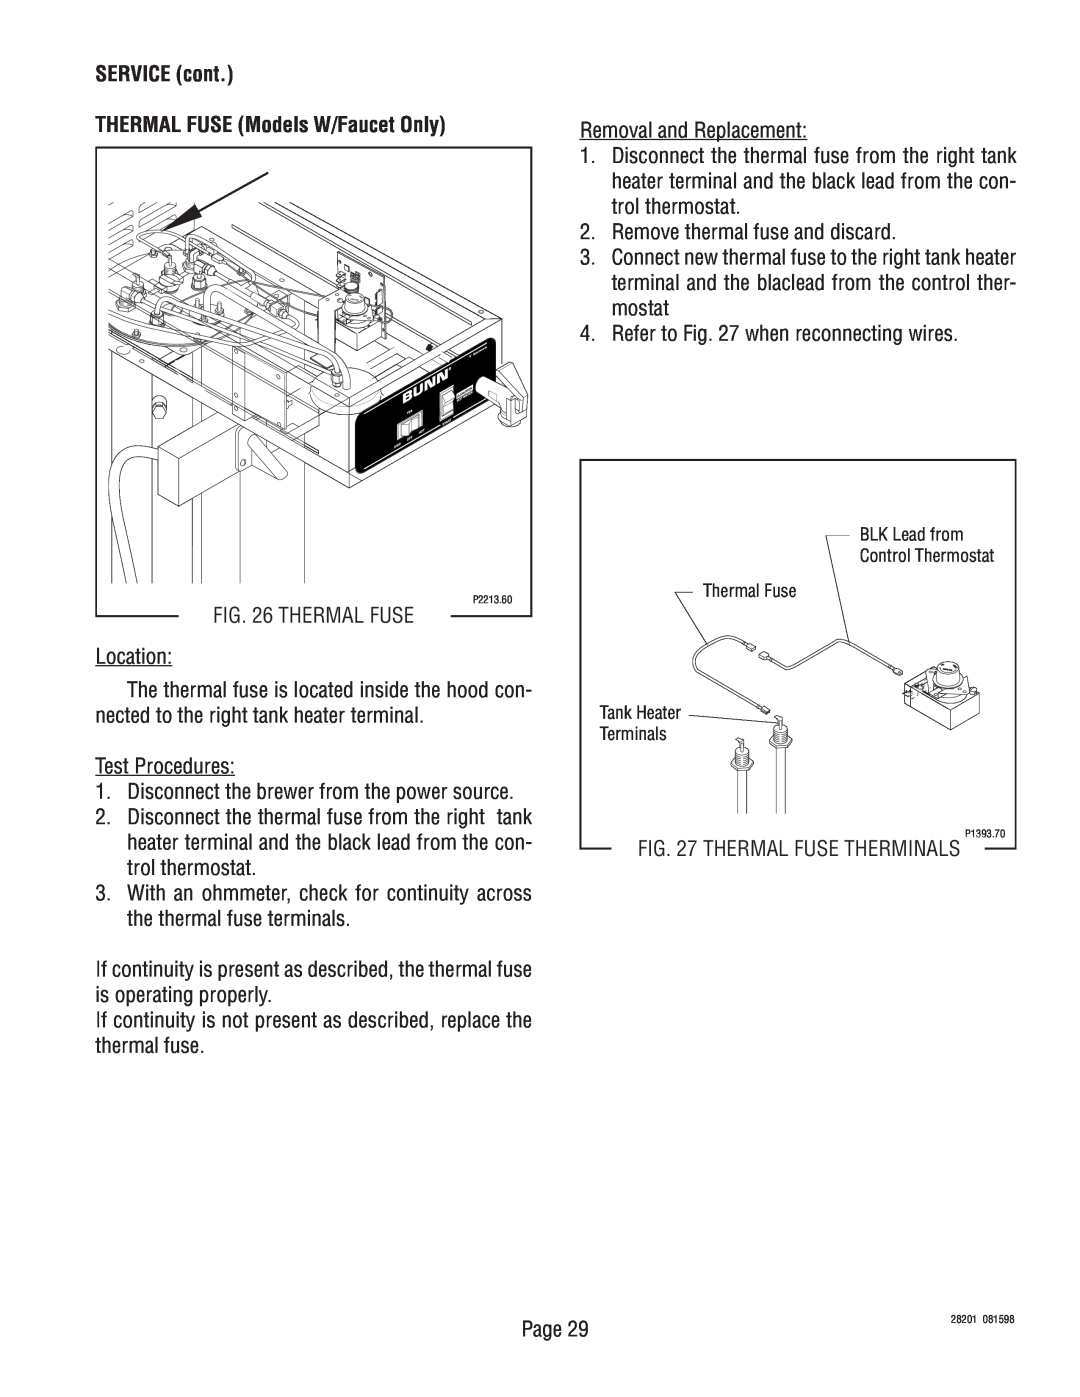 Bunn TNTF-3 service manual SERVICE cont THERMAL FUSE Models W/Faucet Only, Thermal Fuse Therminals 